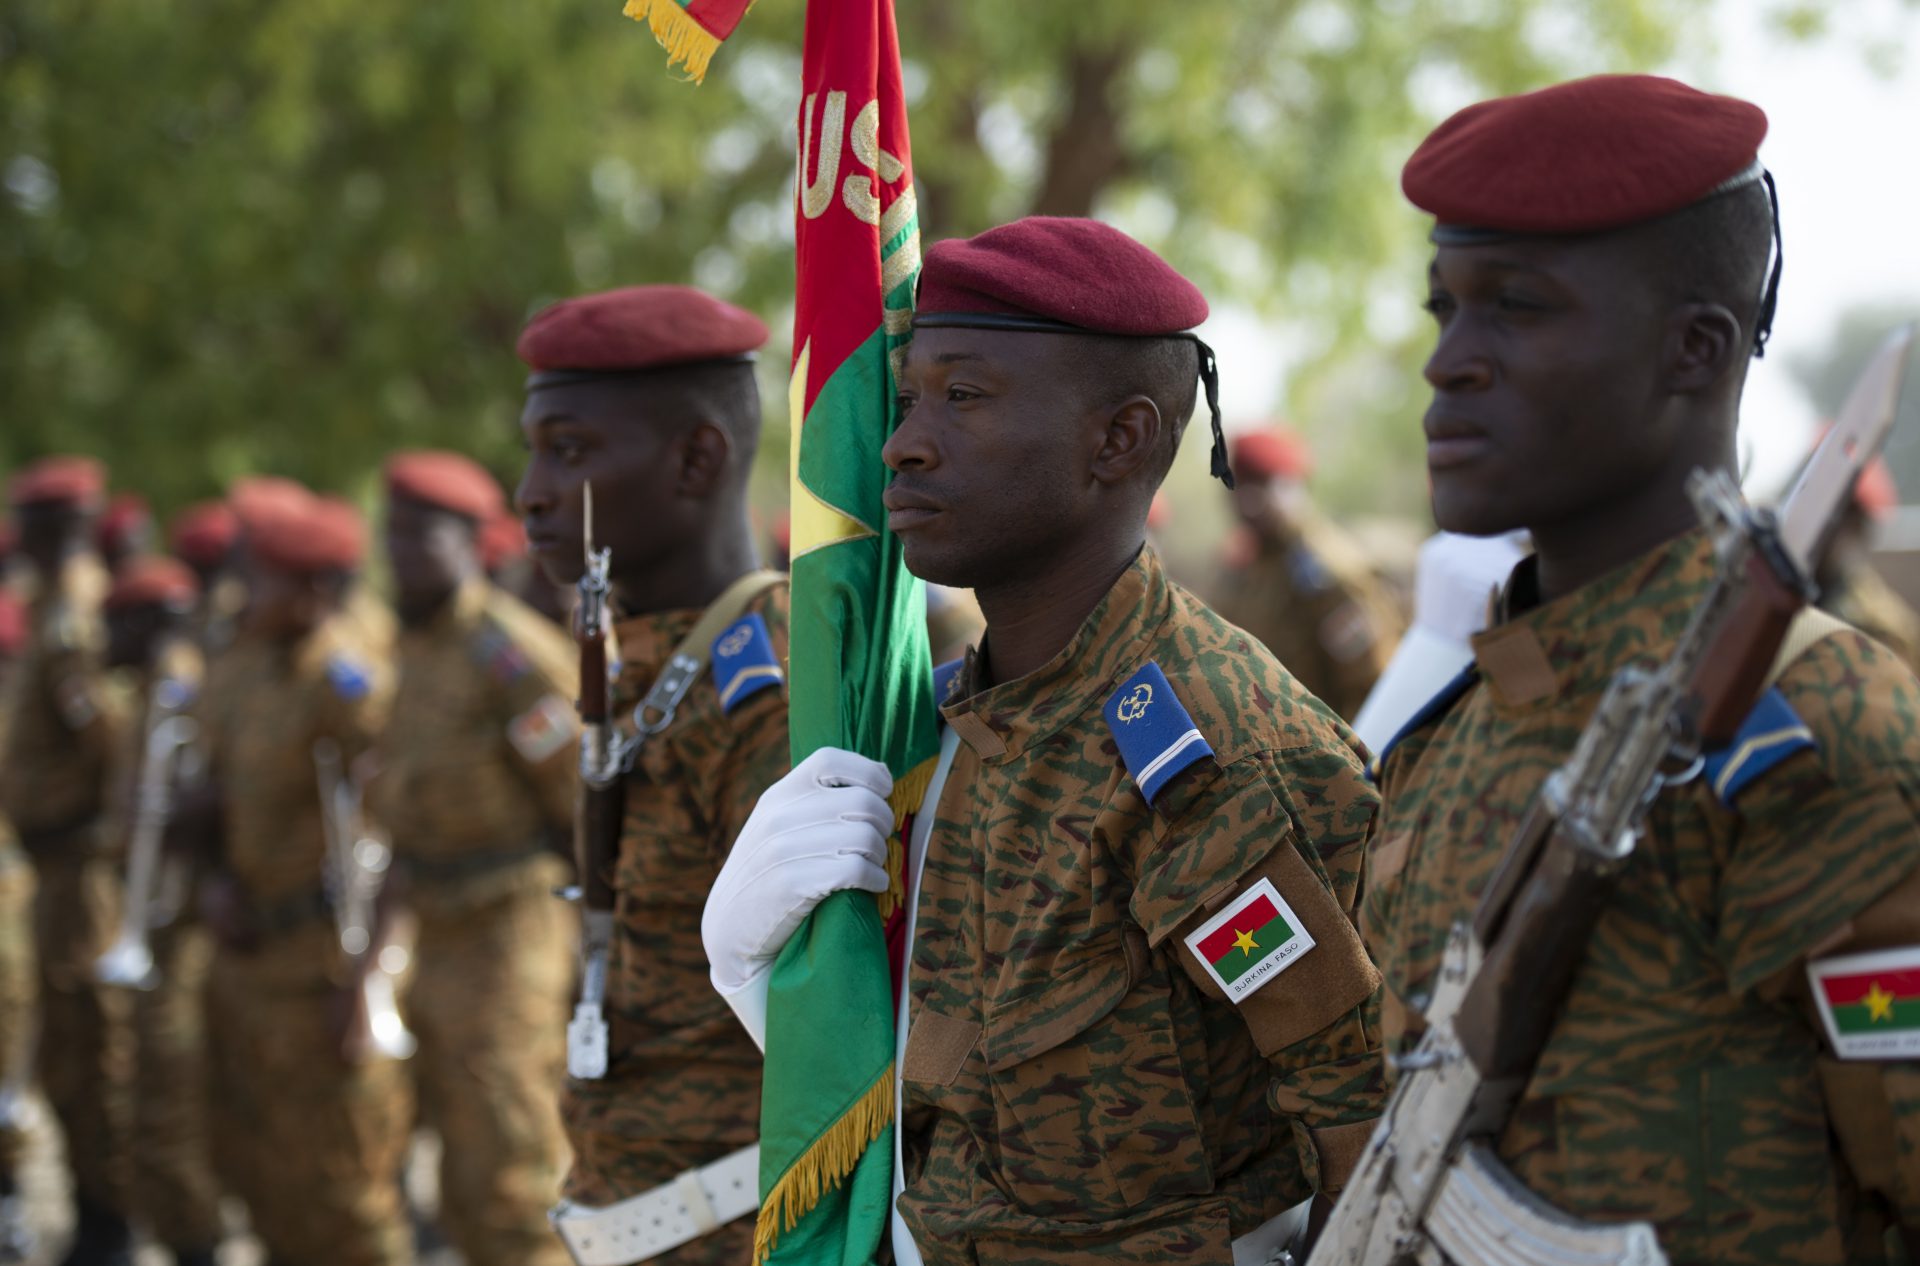 Armed groups expand presence in Burkina Faso